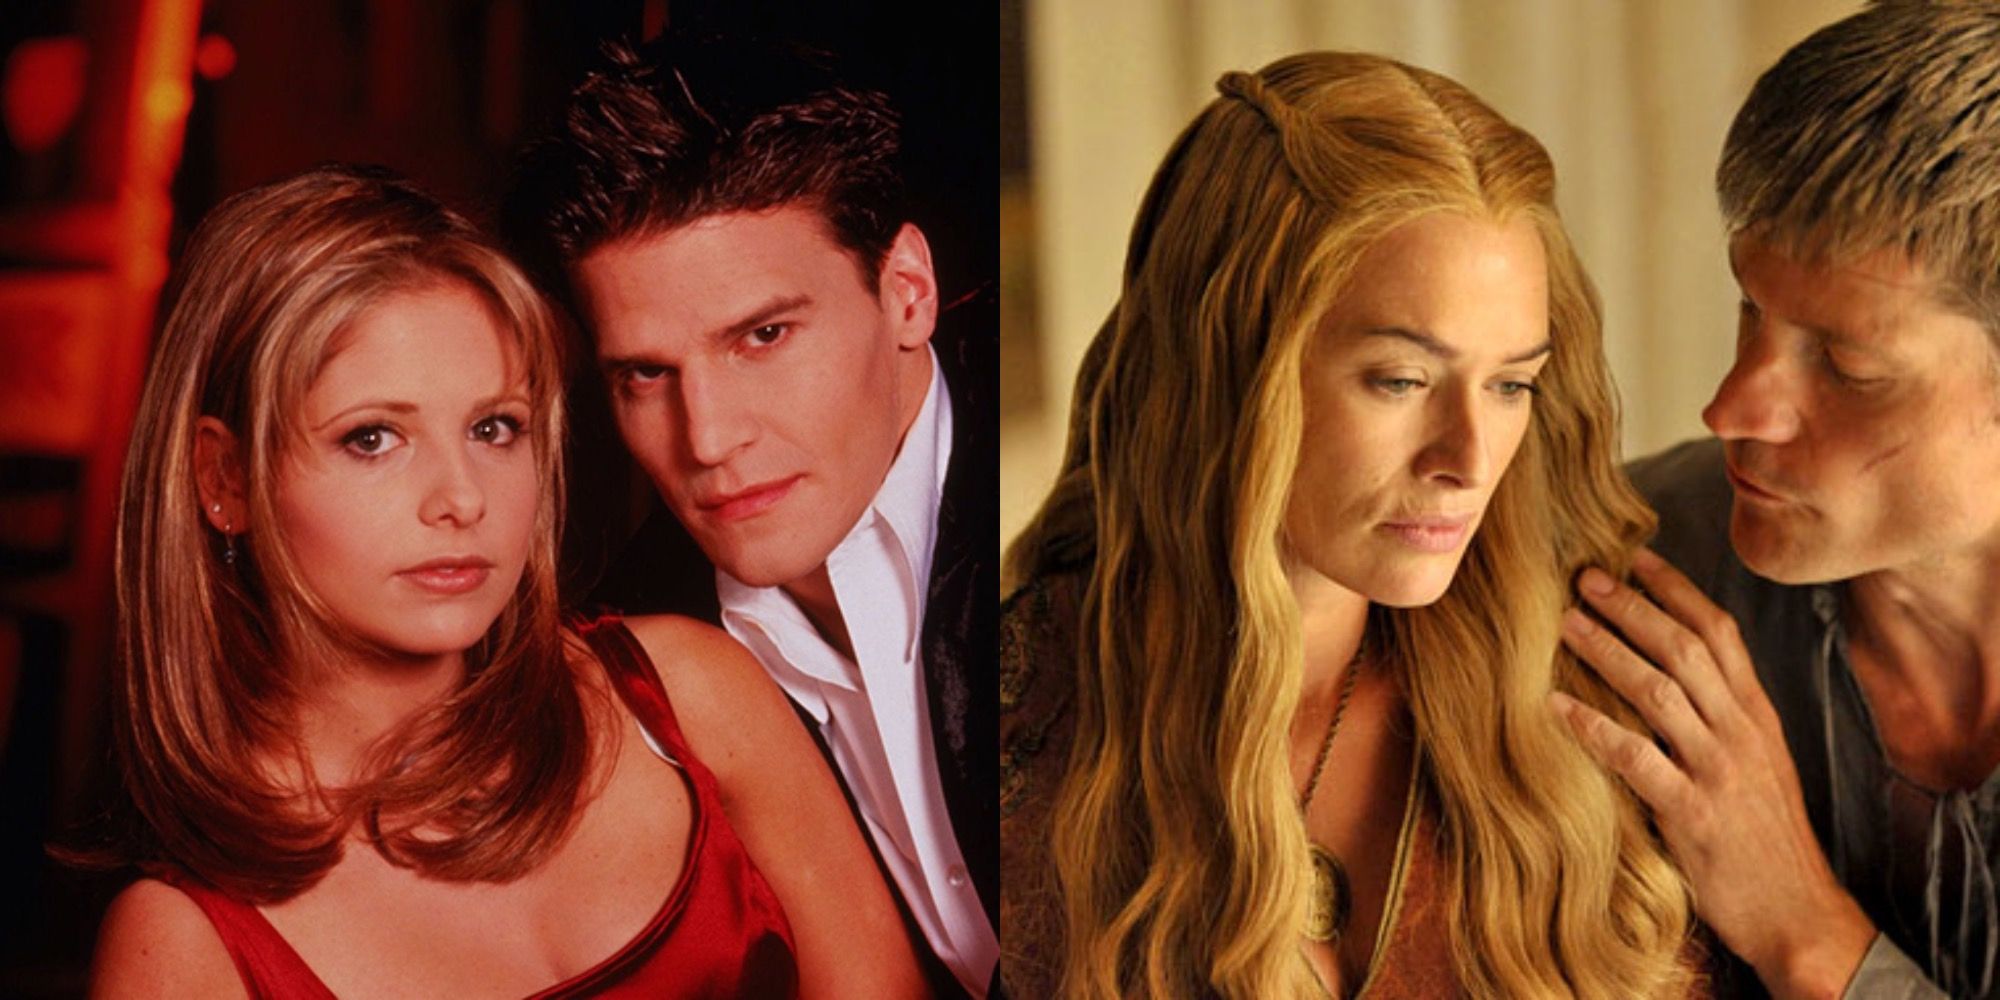 Split Image Of Promo Shots Of Buffy And Angel From Buffy The Vampire Slayer And Cersei And Jamie Lannister From Game Of Thrones